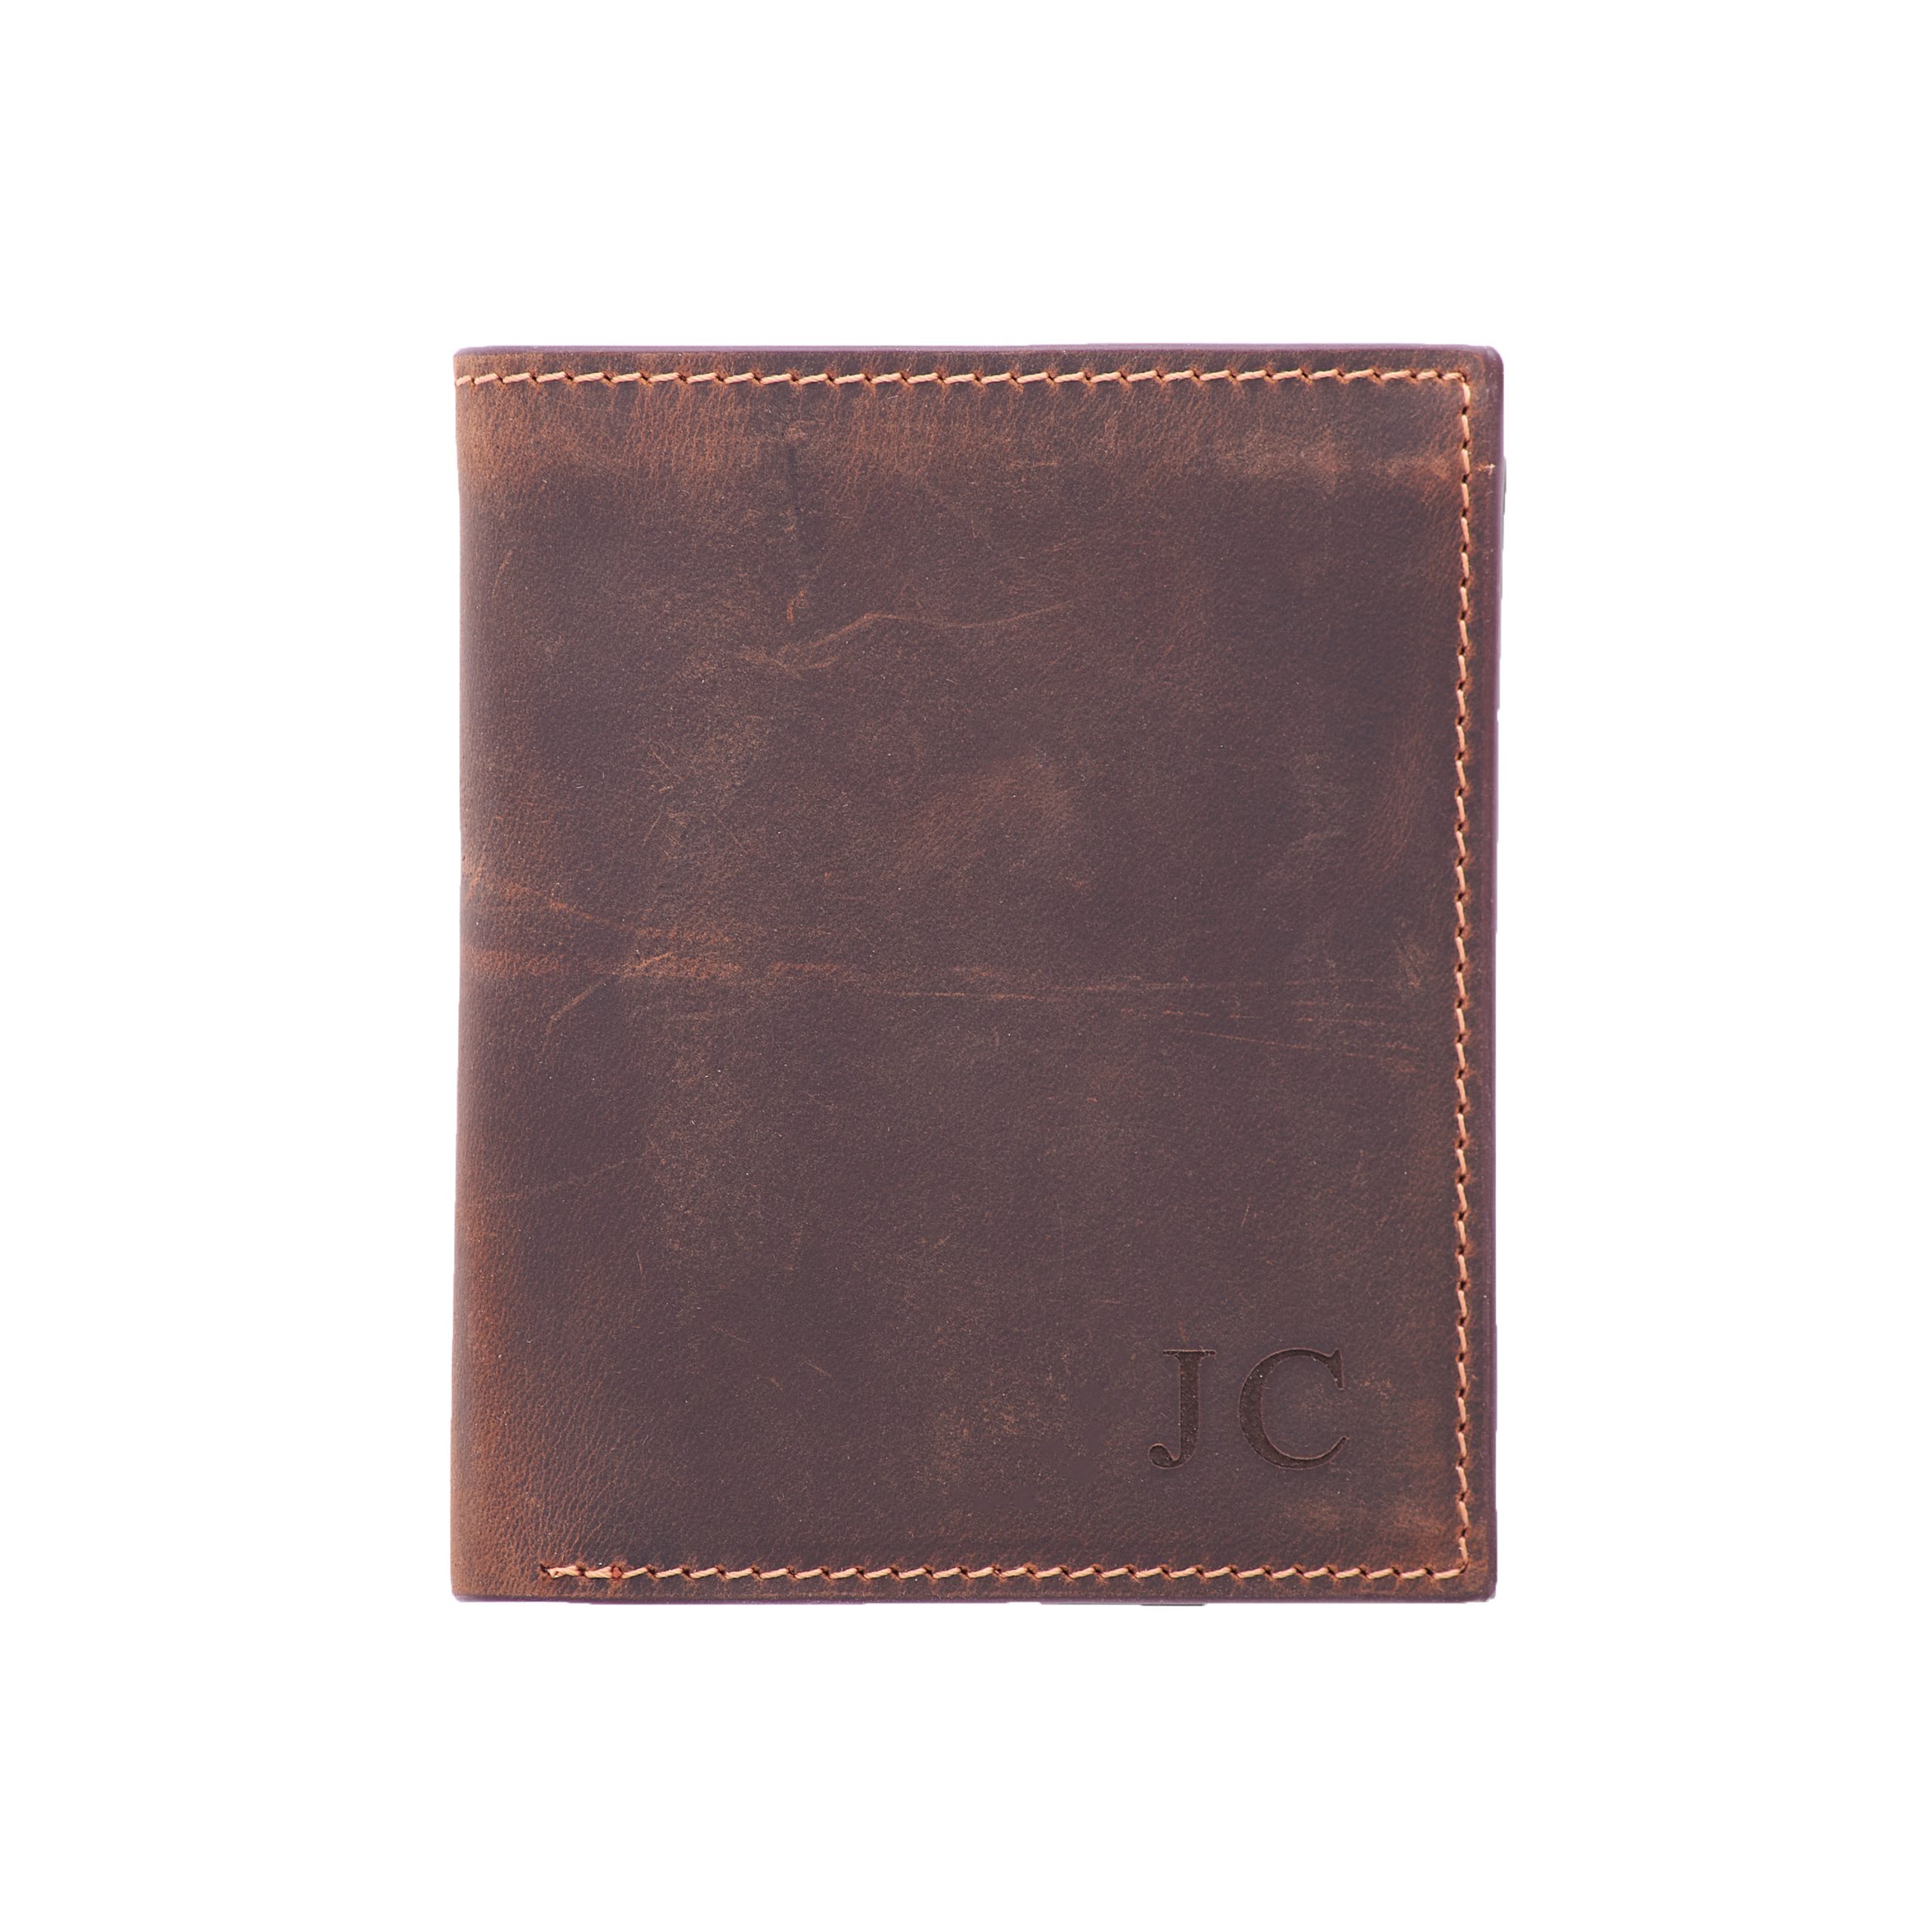 dark-brown-personalised-mens-real-leather-wallets-minimalist-trifold-wallet-uk-gift-for-him